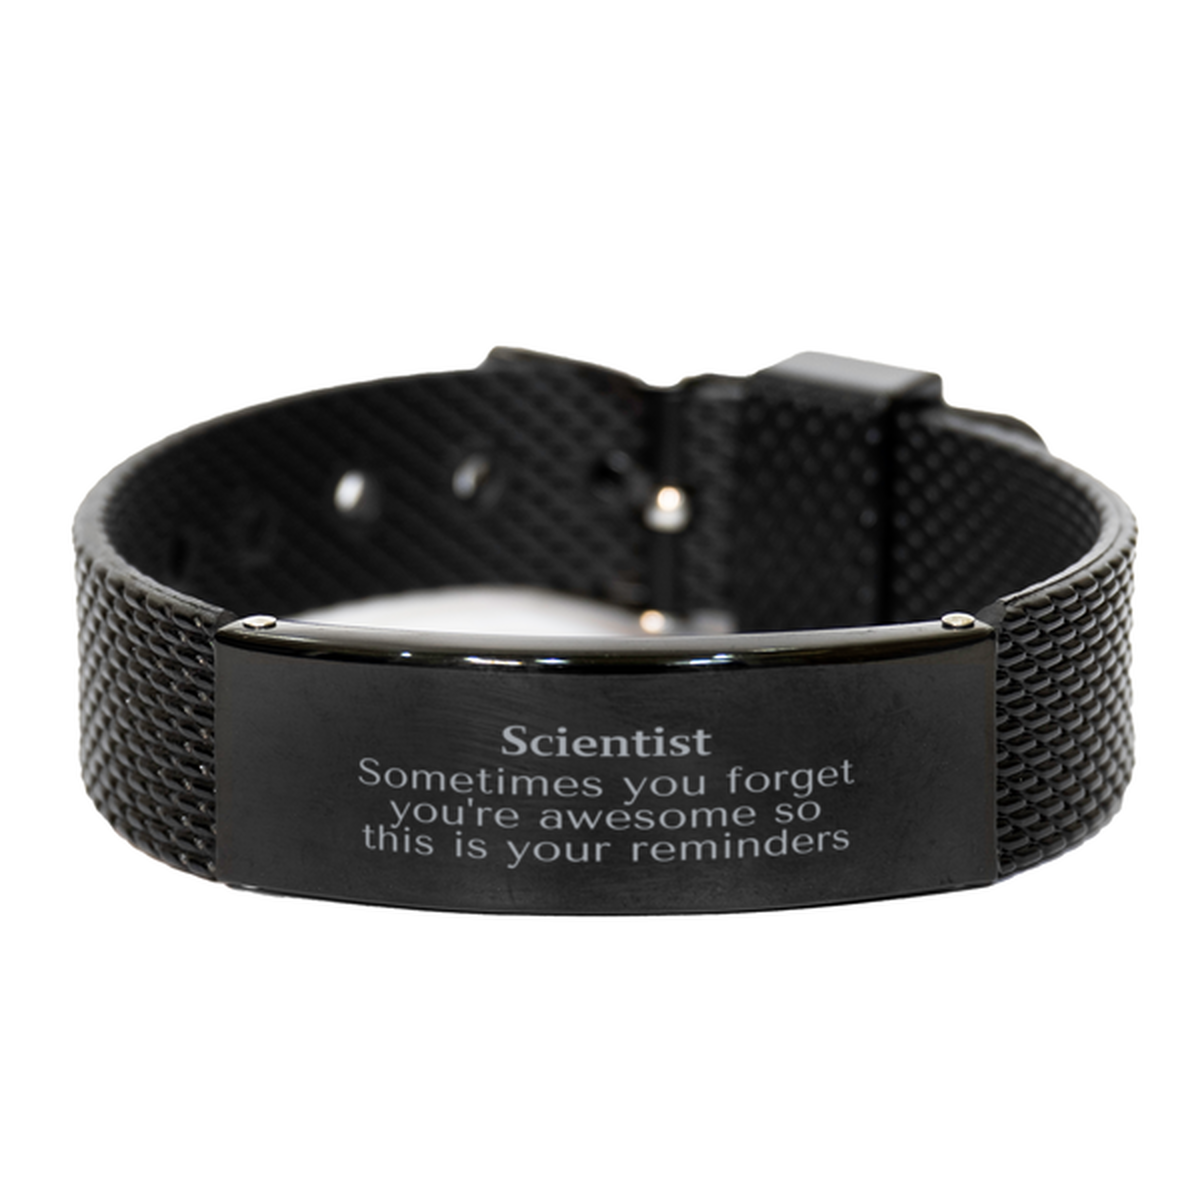 Sentimental Scientist Black Shark Mesh Bracelet, Scientist Sometimes you forget you're awesome so this is your reminders, Graduation Christmas Birthday Gifts for Scientist, Men, Women, Coworkers